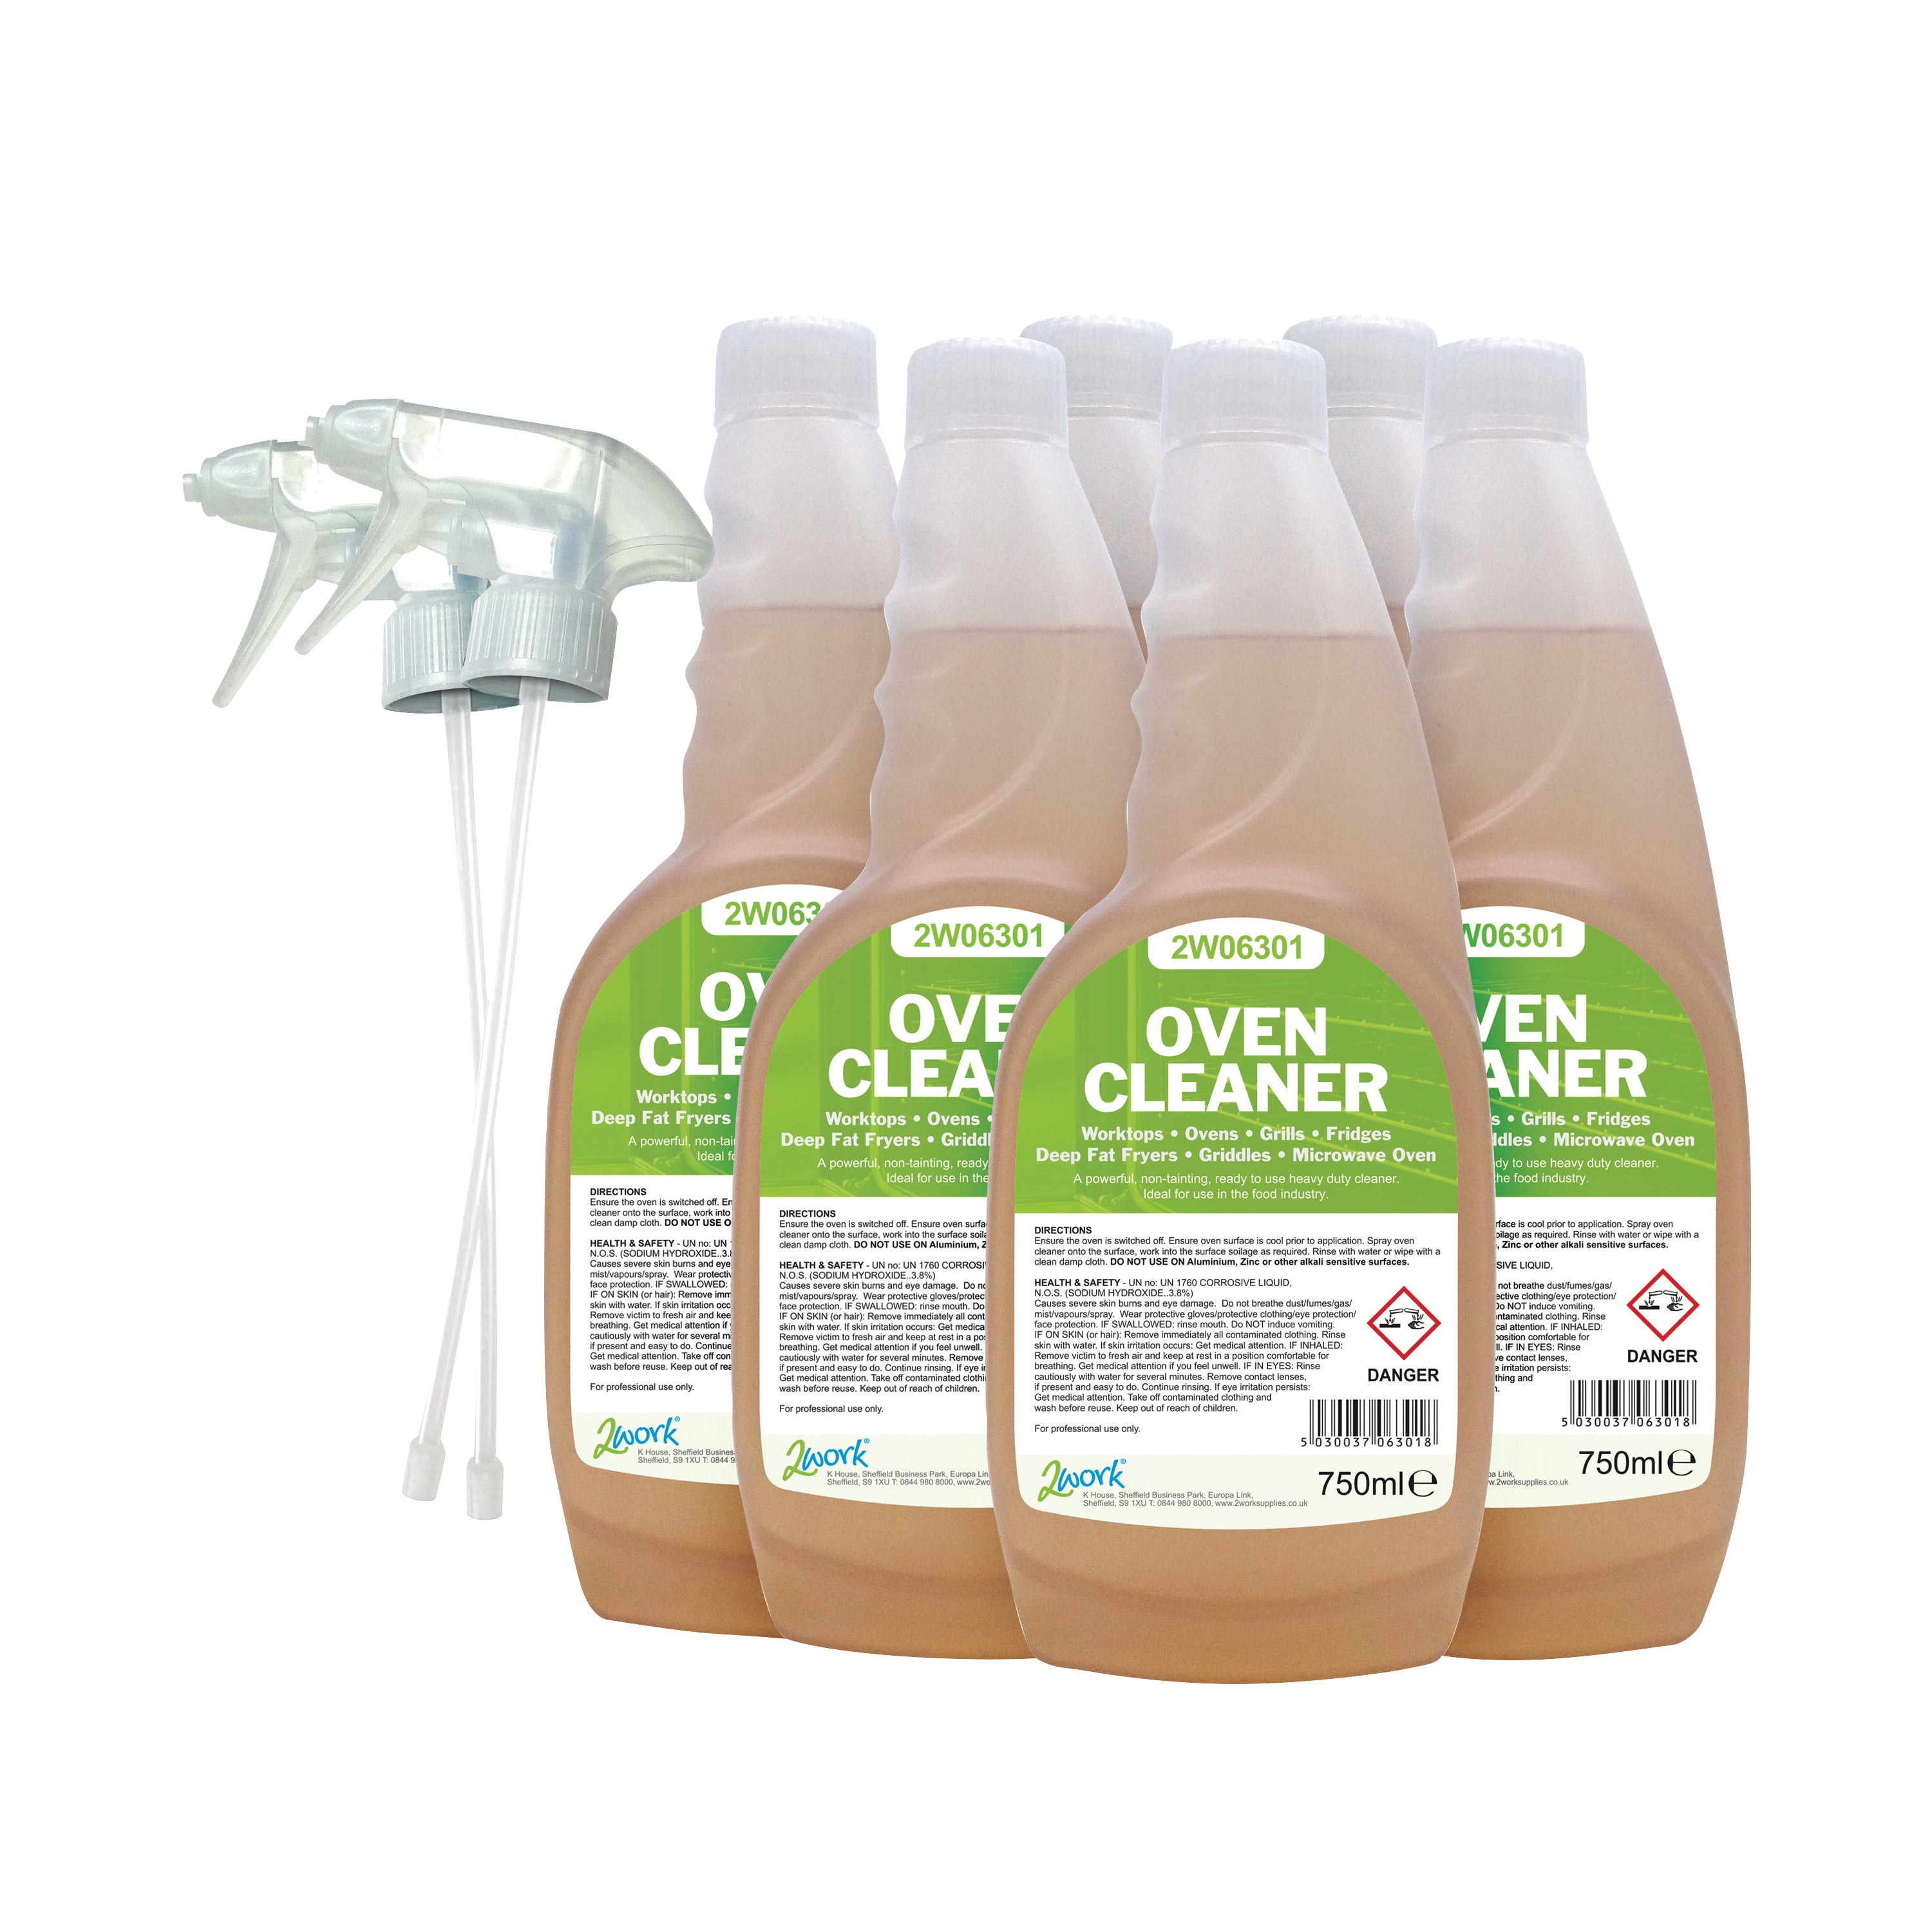 2Work Oven Cleaner Trigger Spray 750ml (Pack of 6) 2W07253